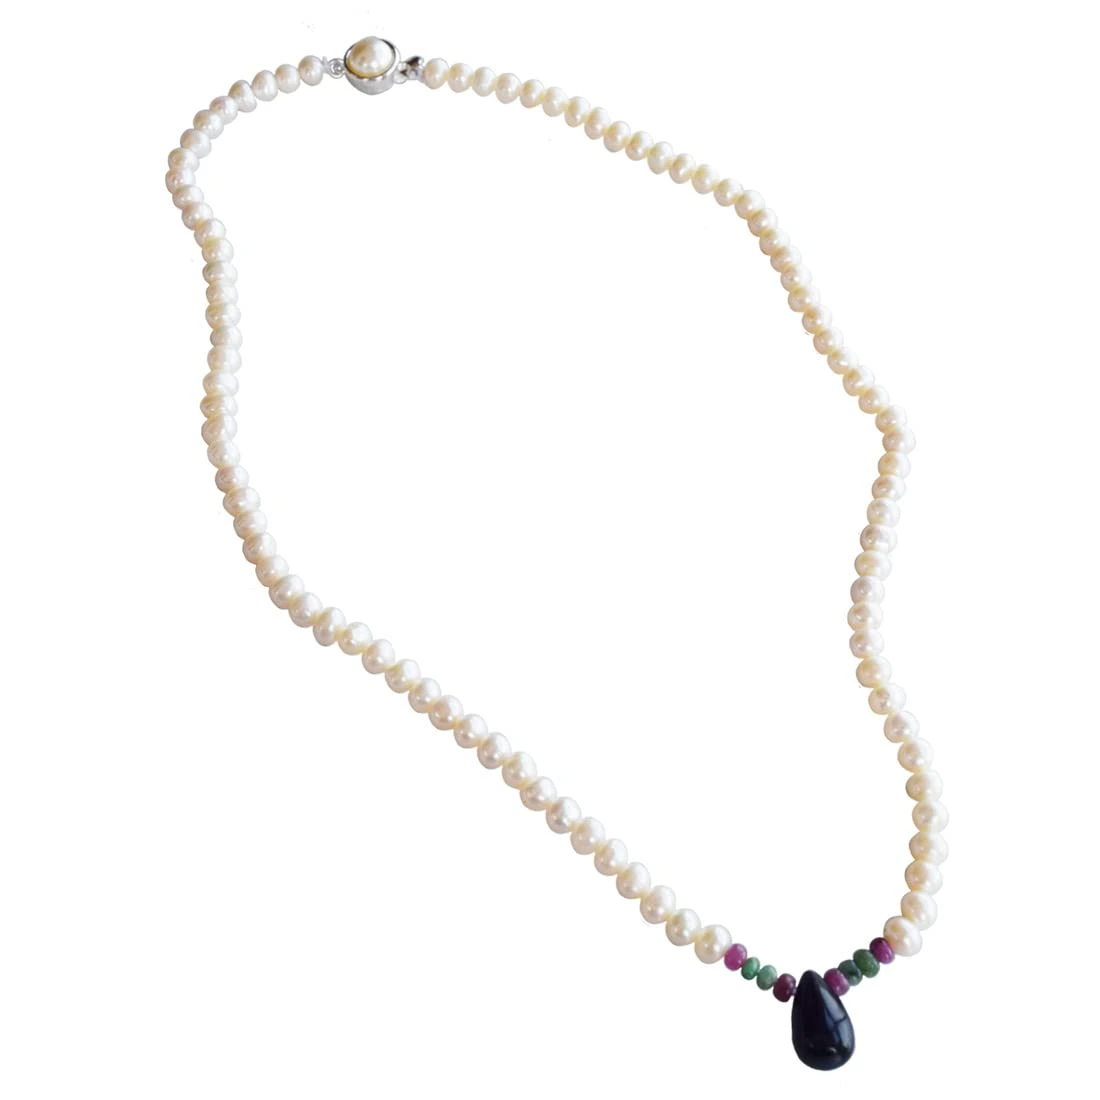 Drop Sapphire, Emerald, Ruby Beads & Rice Pearl Necklace (SN463)